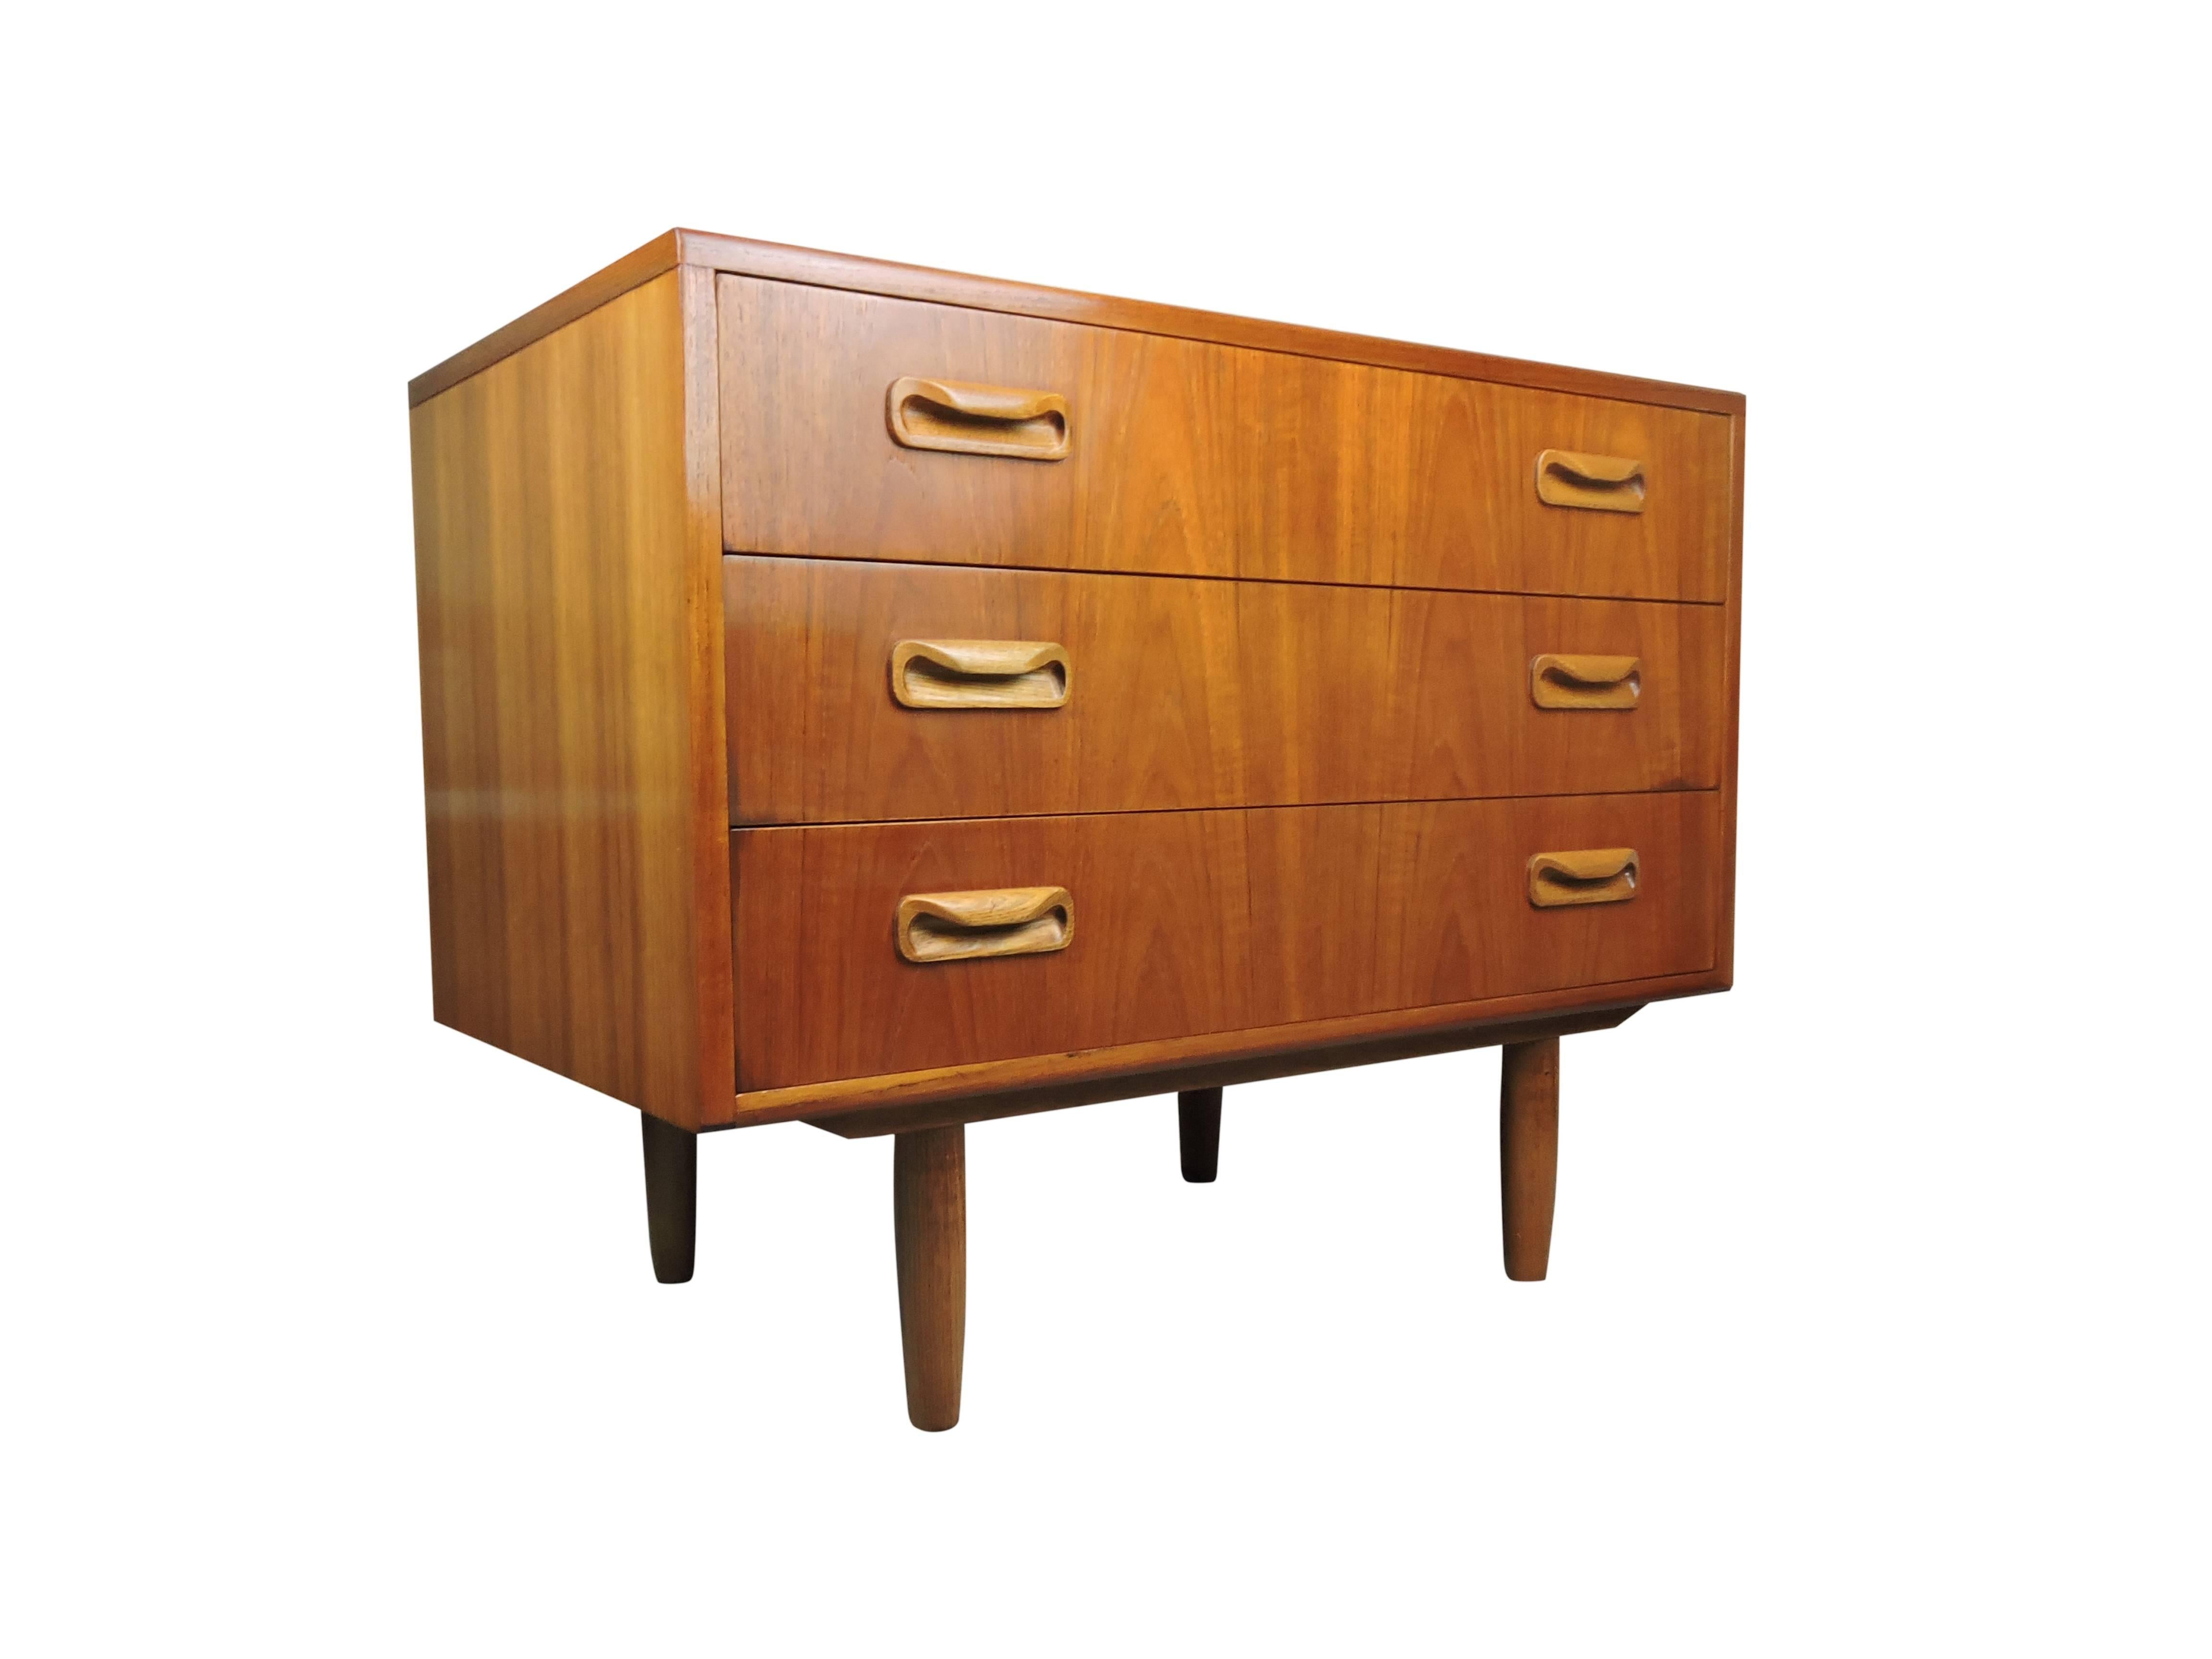 A G-Plan teak three-drawer chest standing on four turned legs.